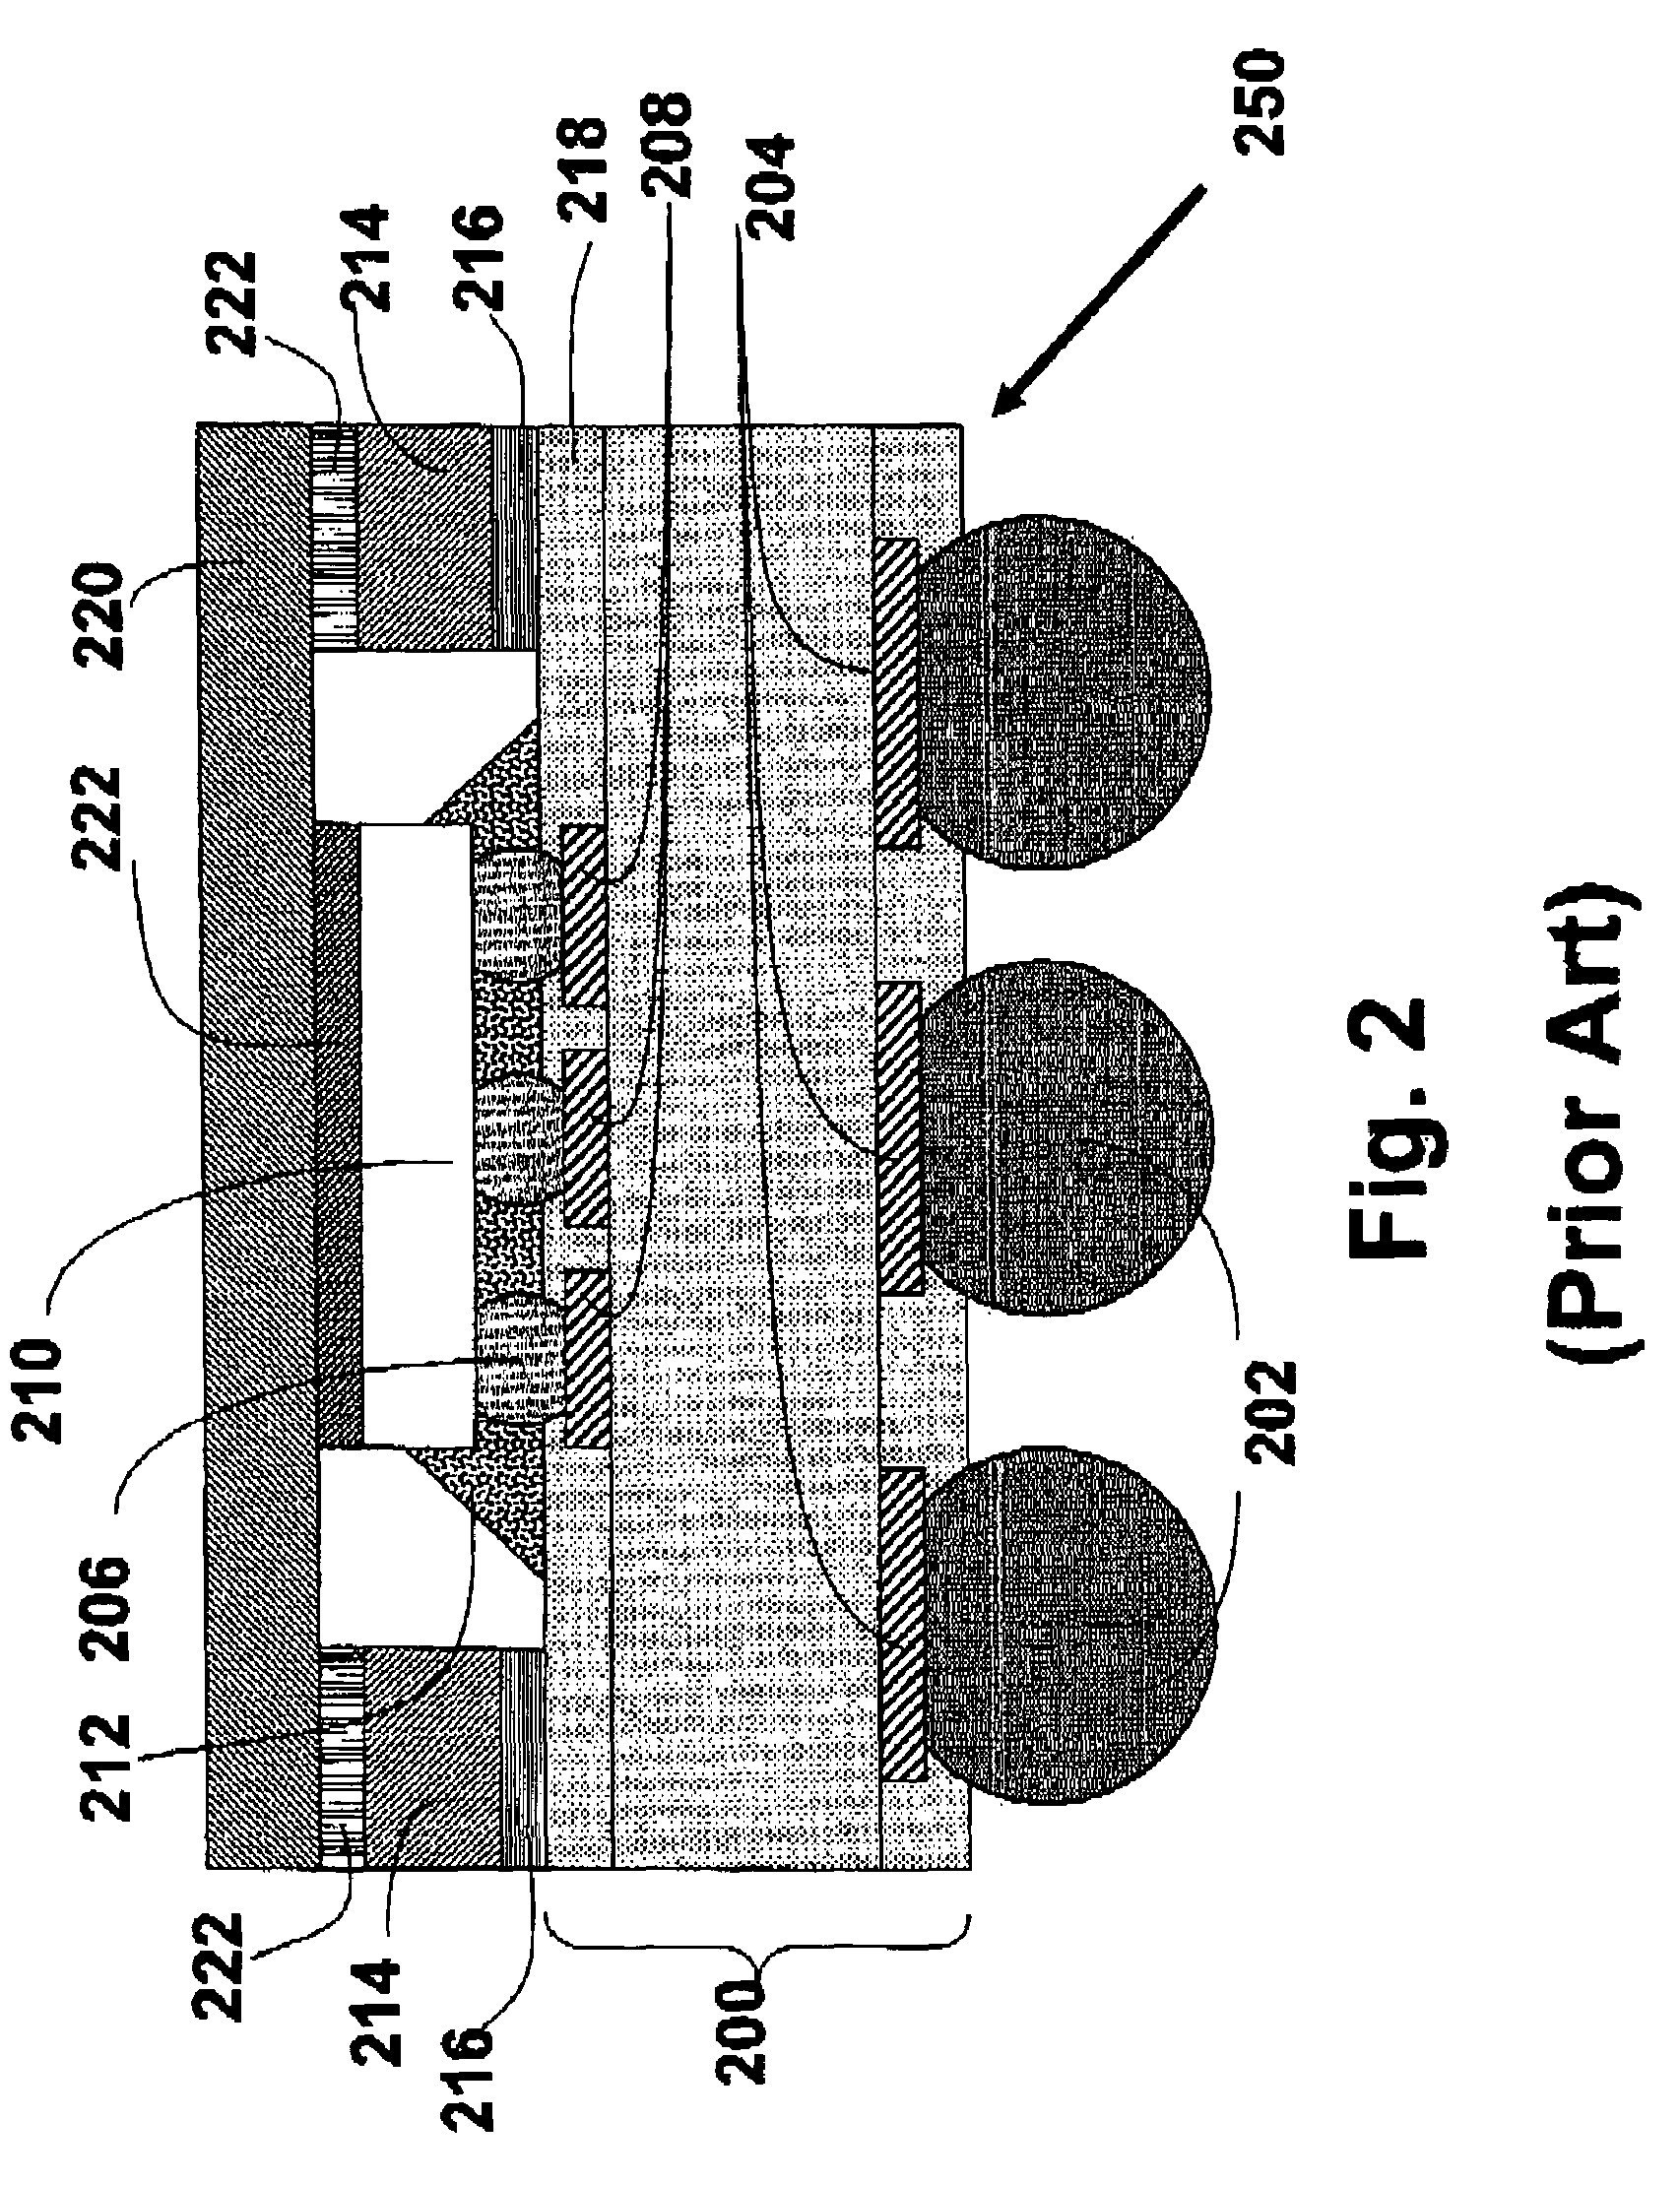 Integrated circuit support structures and their fabrication